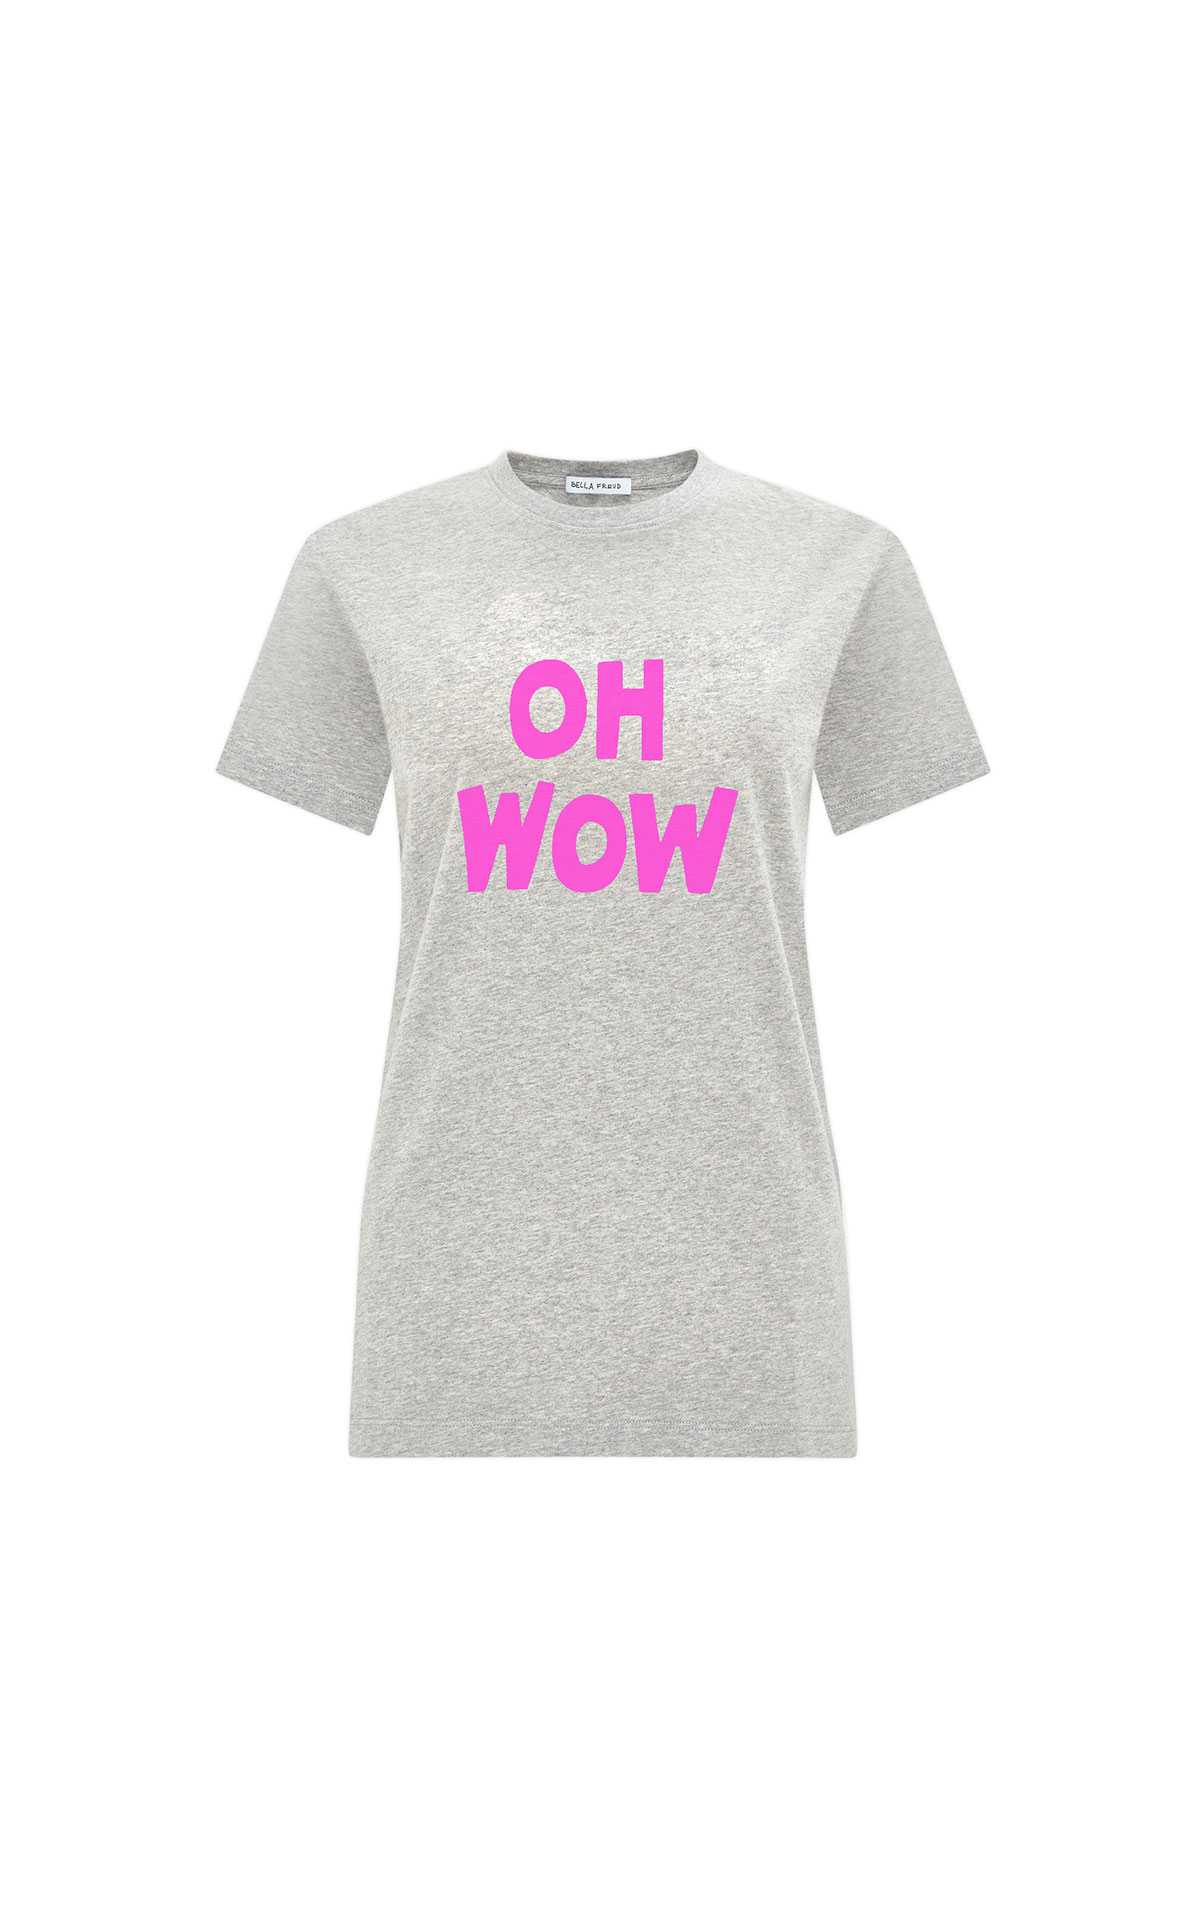 Bella Freud Oh wow tee from Bicester Village